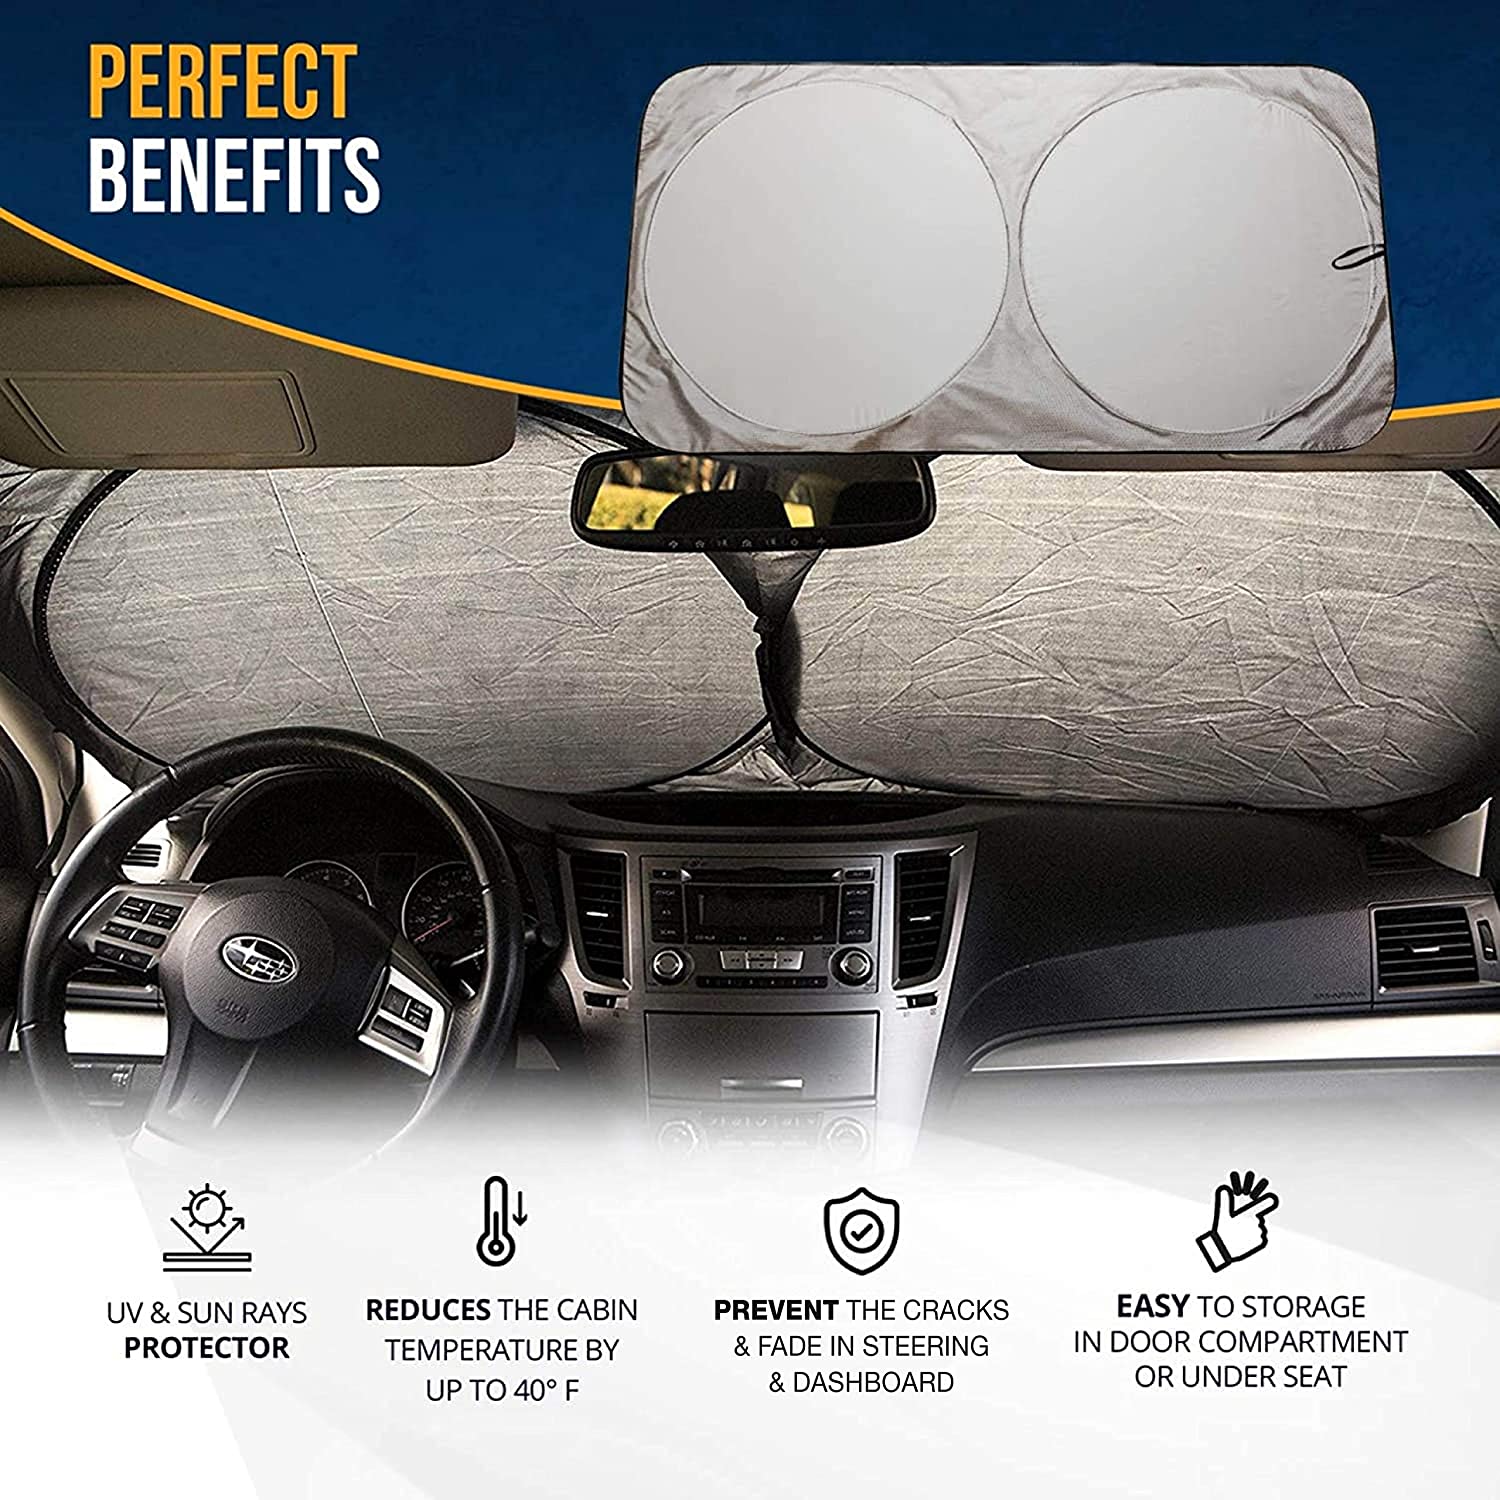 20 Best Car Interior Accessories for an Awesome Roadtrip!